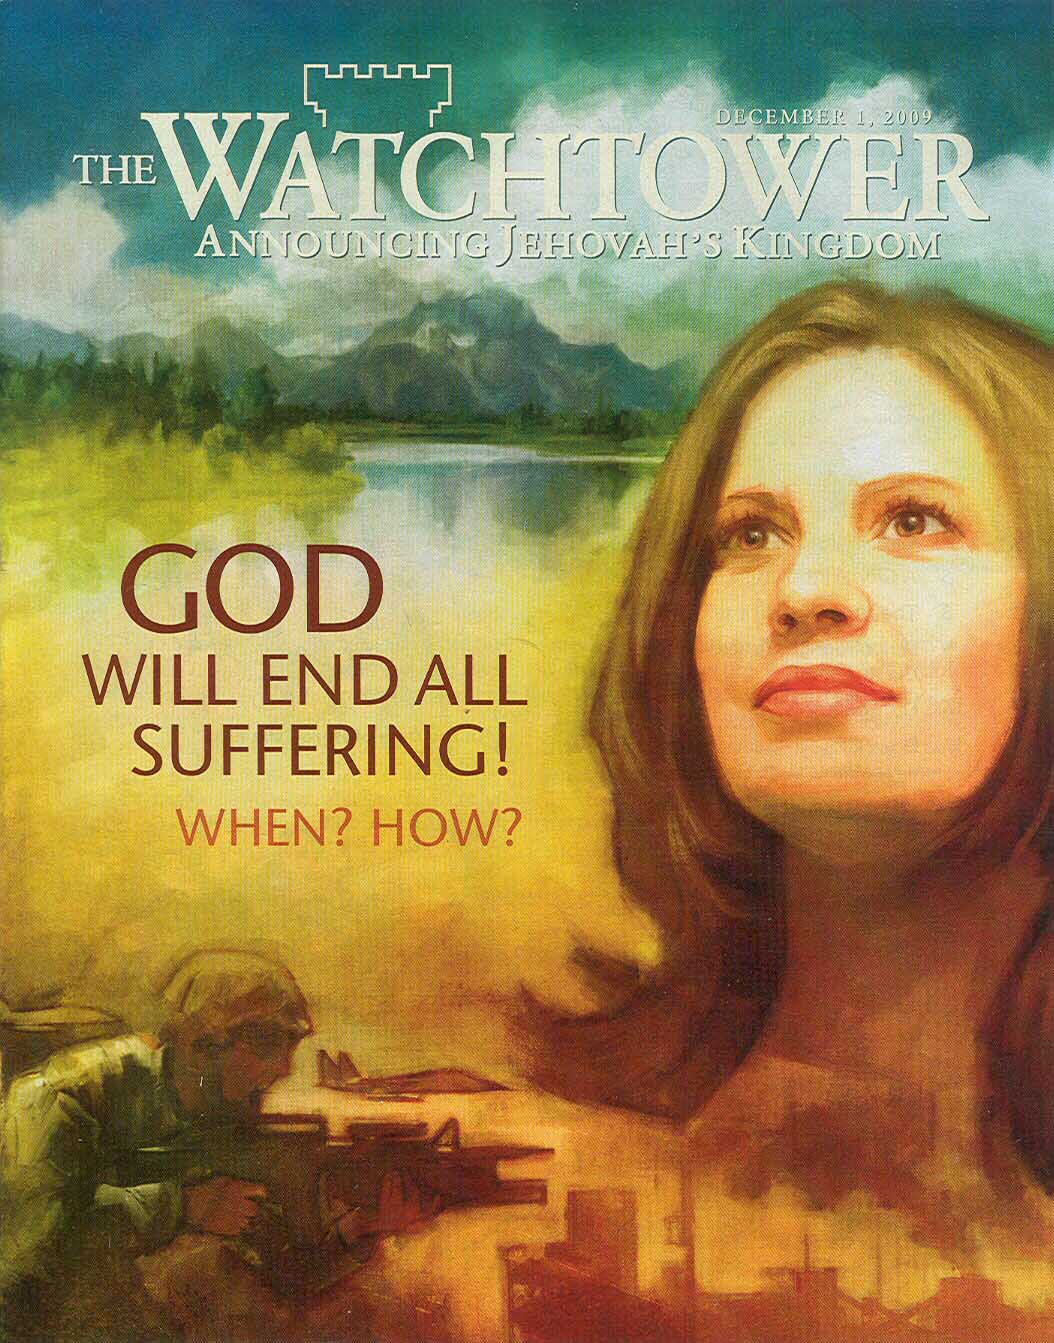 Jehovah witnesses image Watch Tower HD wallpaper and background